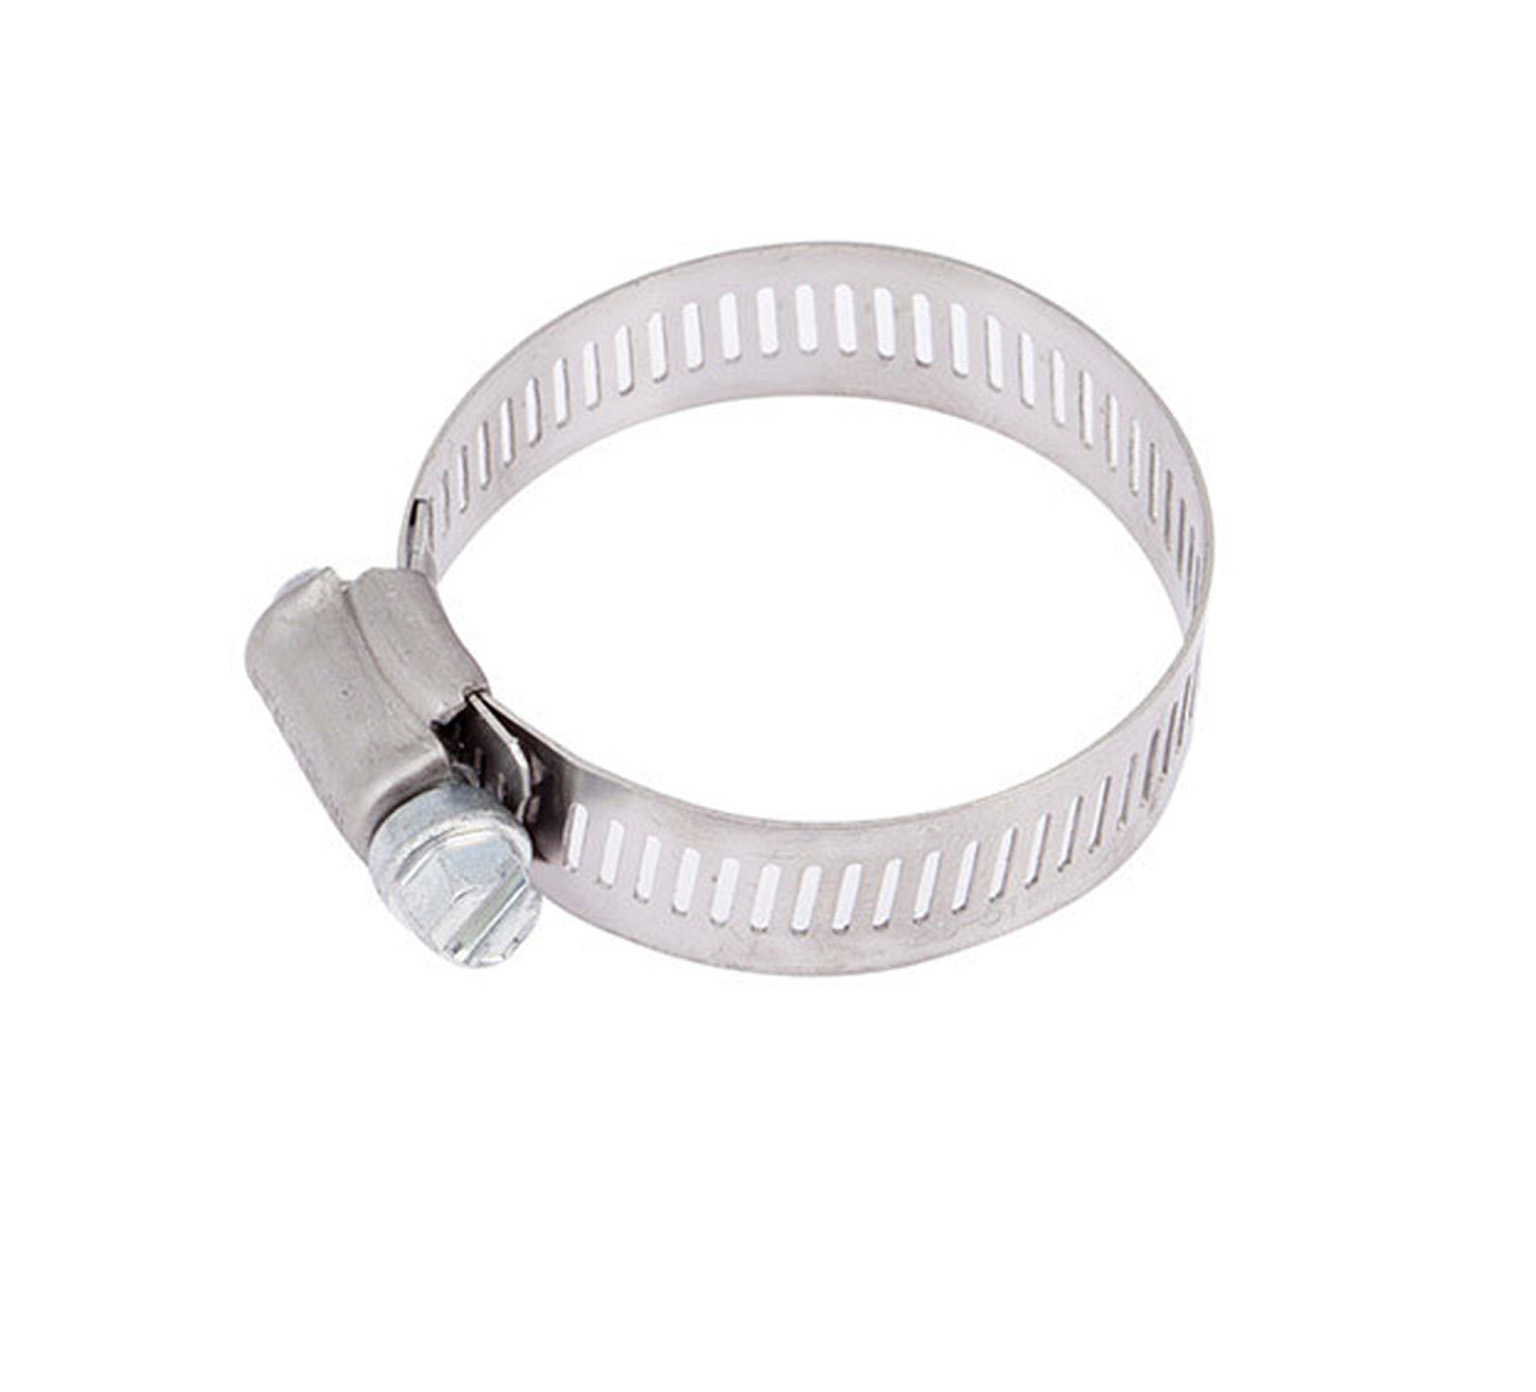 11531 Stainless Steel Hose Clamp - 1.06 -2 in x 0.5 in alt 1